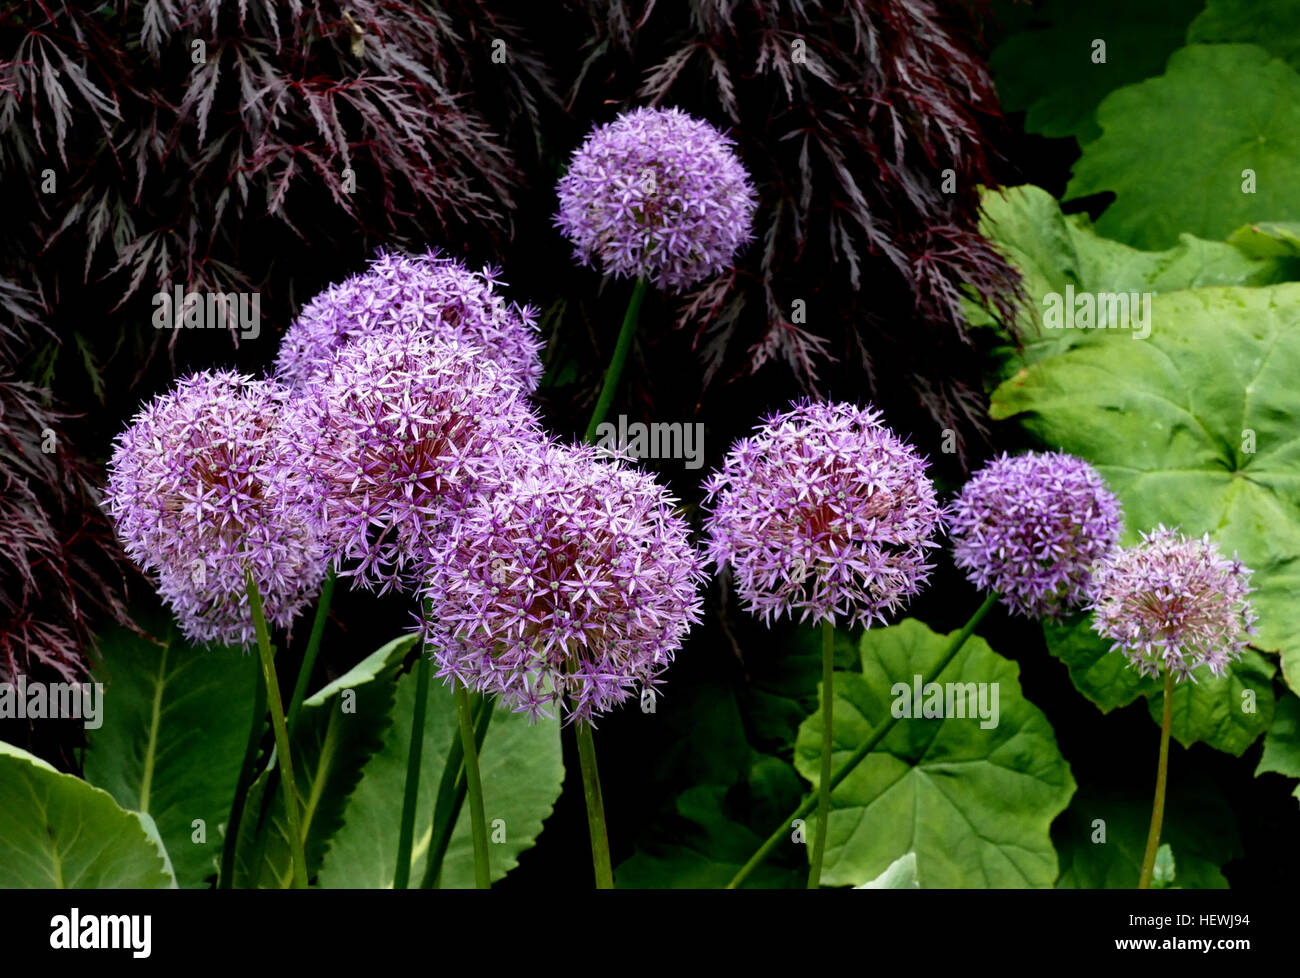 The magnificent, spherical blooms of Allium 'Globemaster' are up to 15cm (6&quot;) across! Flowering only once in a season, the blooms are followed by skeletal seedheads for a spectacular autumn display. Undemanding and easy to grow, these purple alliums are guaranteed to add the 'wow' factor to borders and cut flower arrangements. Height: 80cm (31&quot;). Spread: 15cm (6&quot;). Bulb size 18/20. Stock Photo